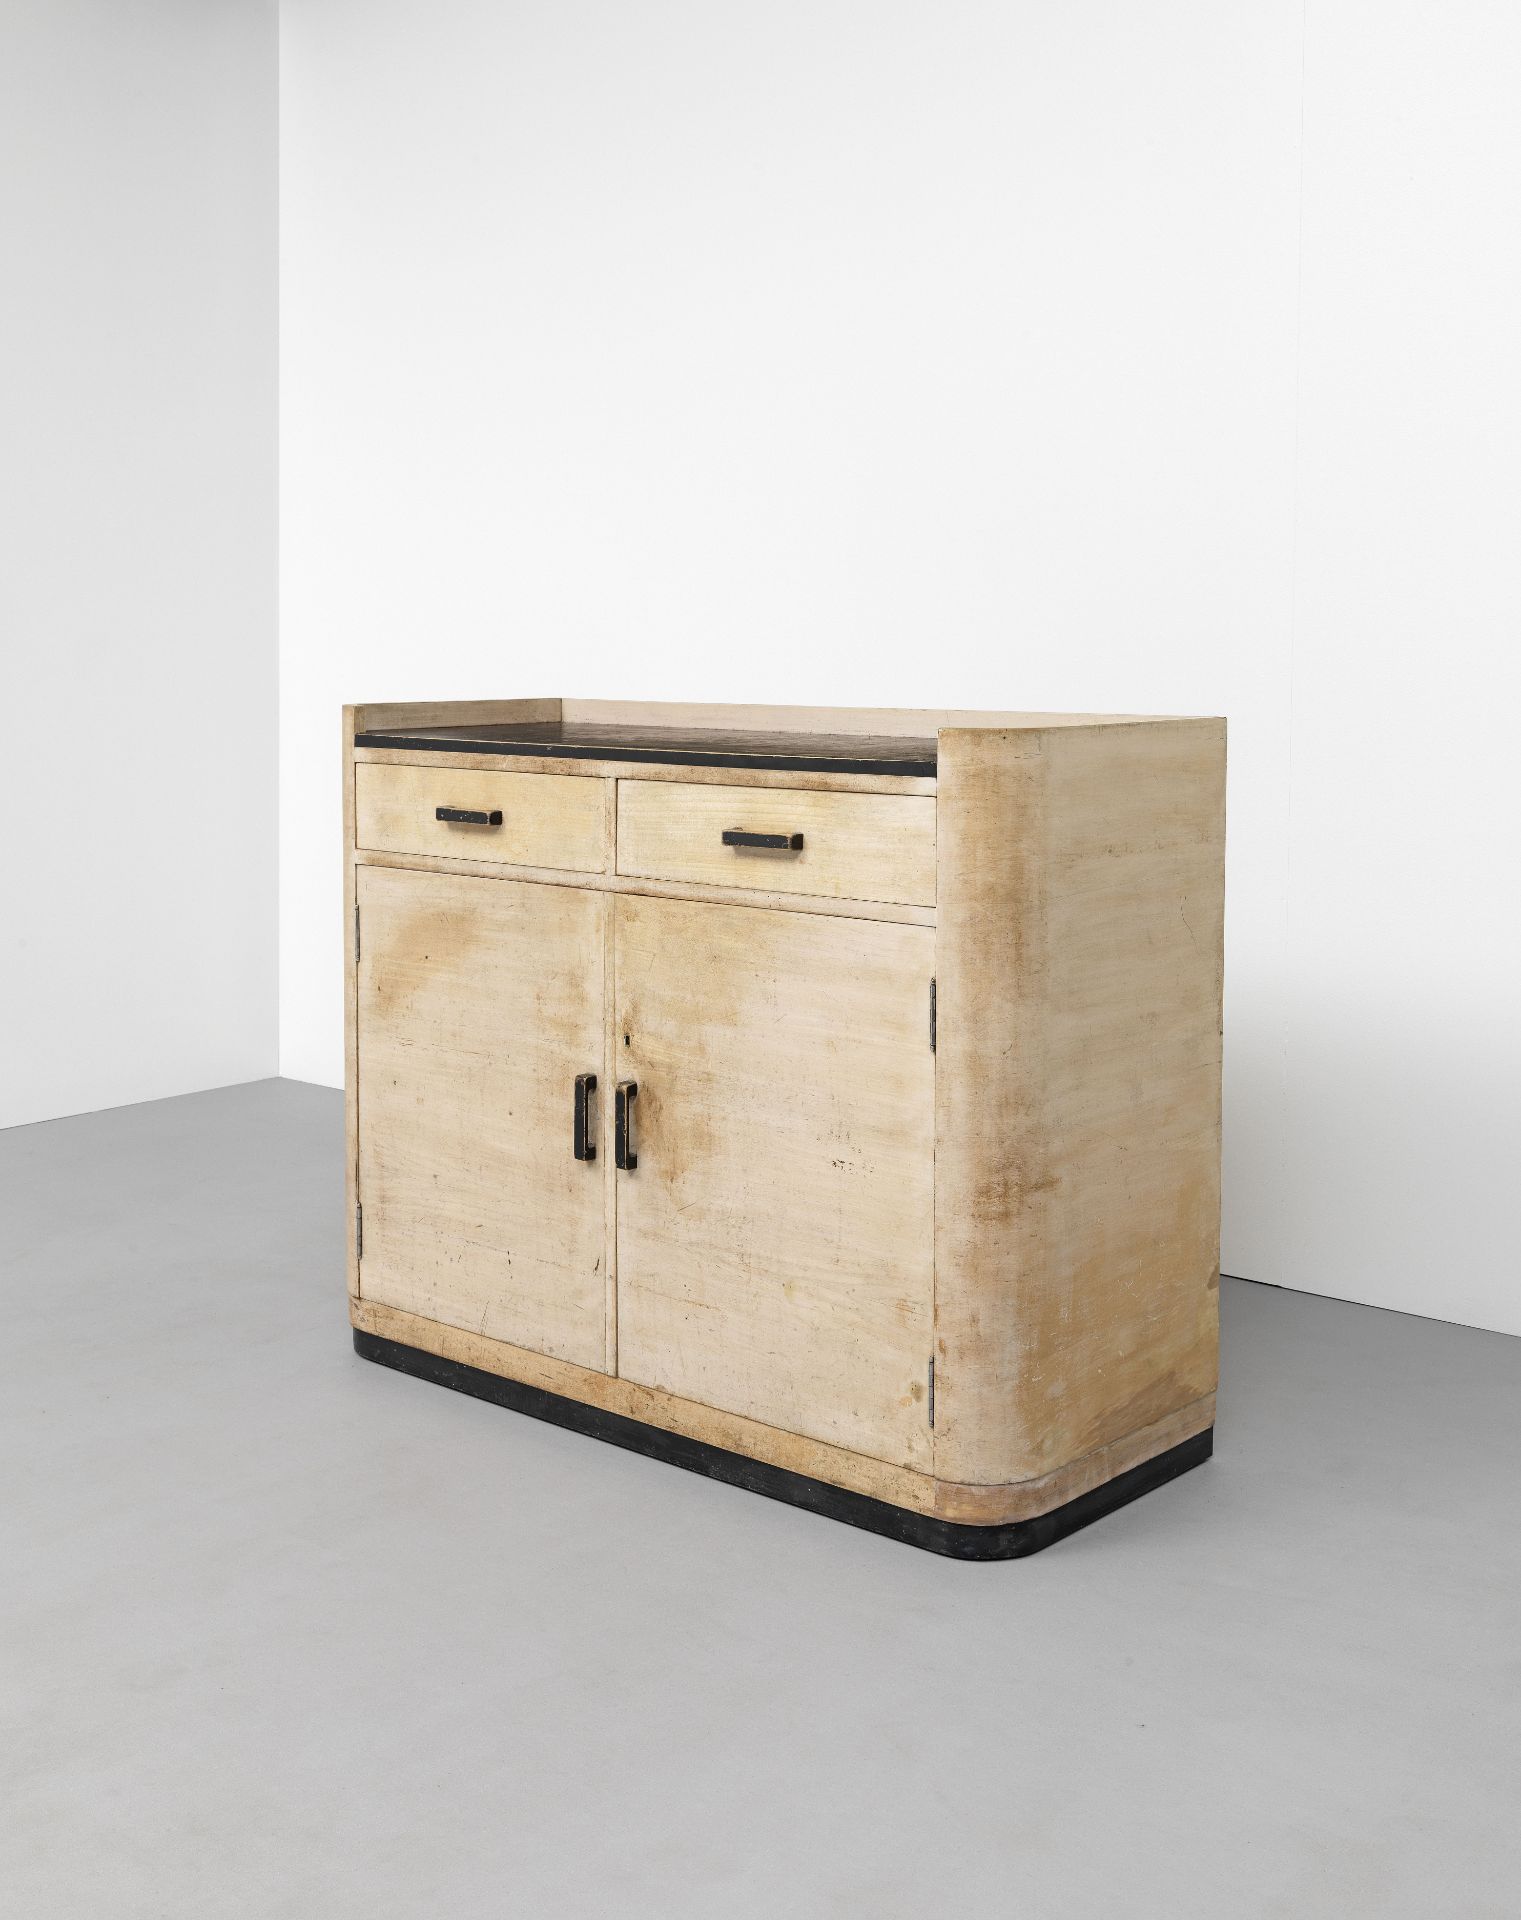 Heal & Son Sideboard, model no. D1225, 1930s